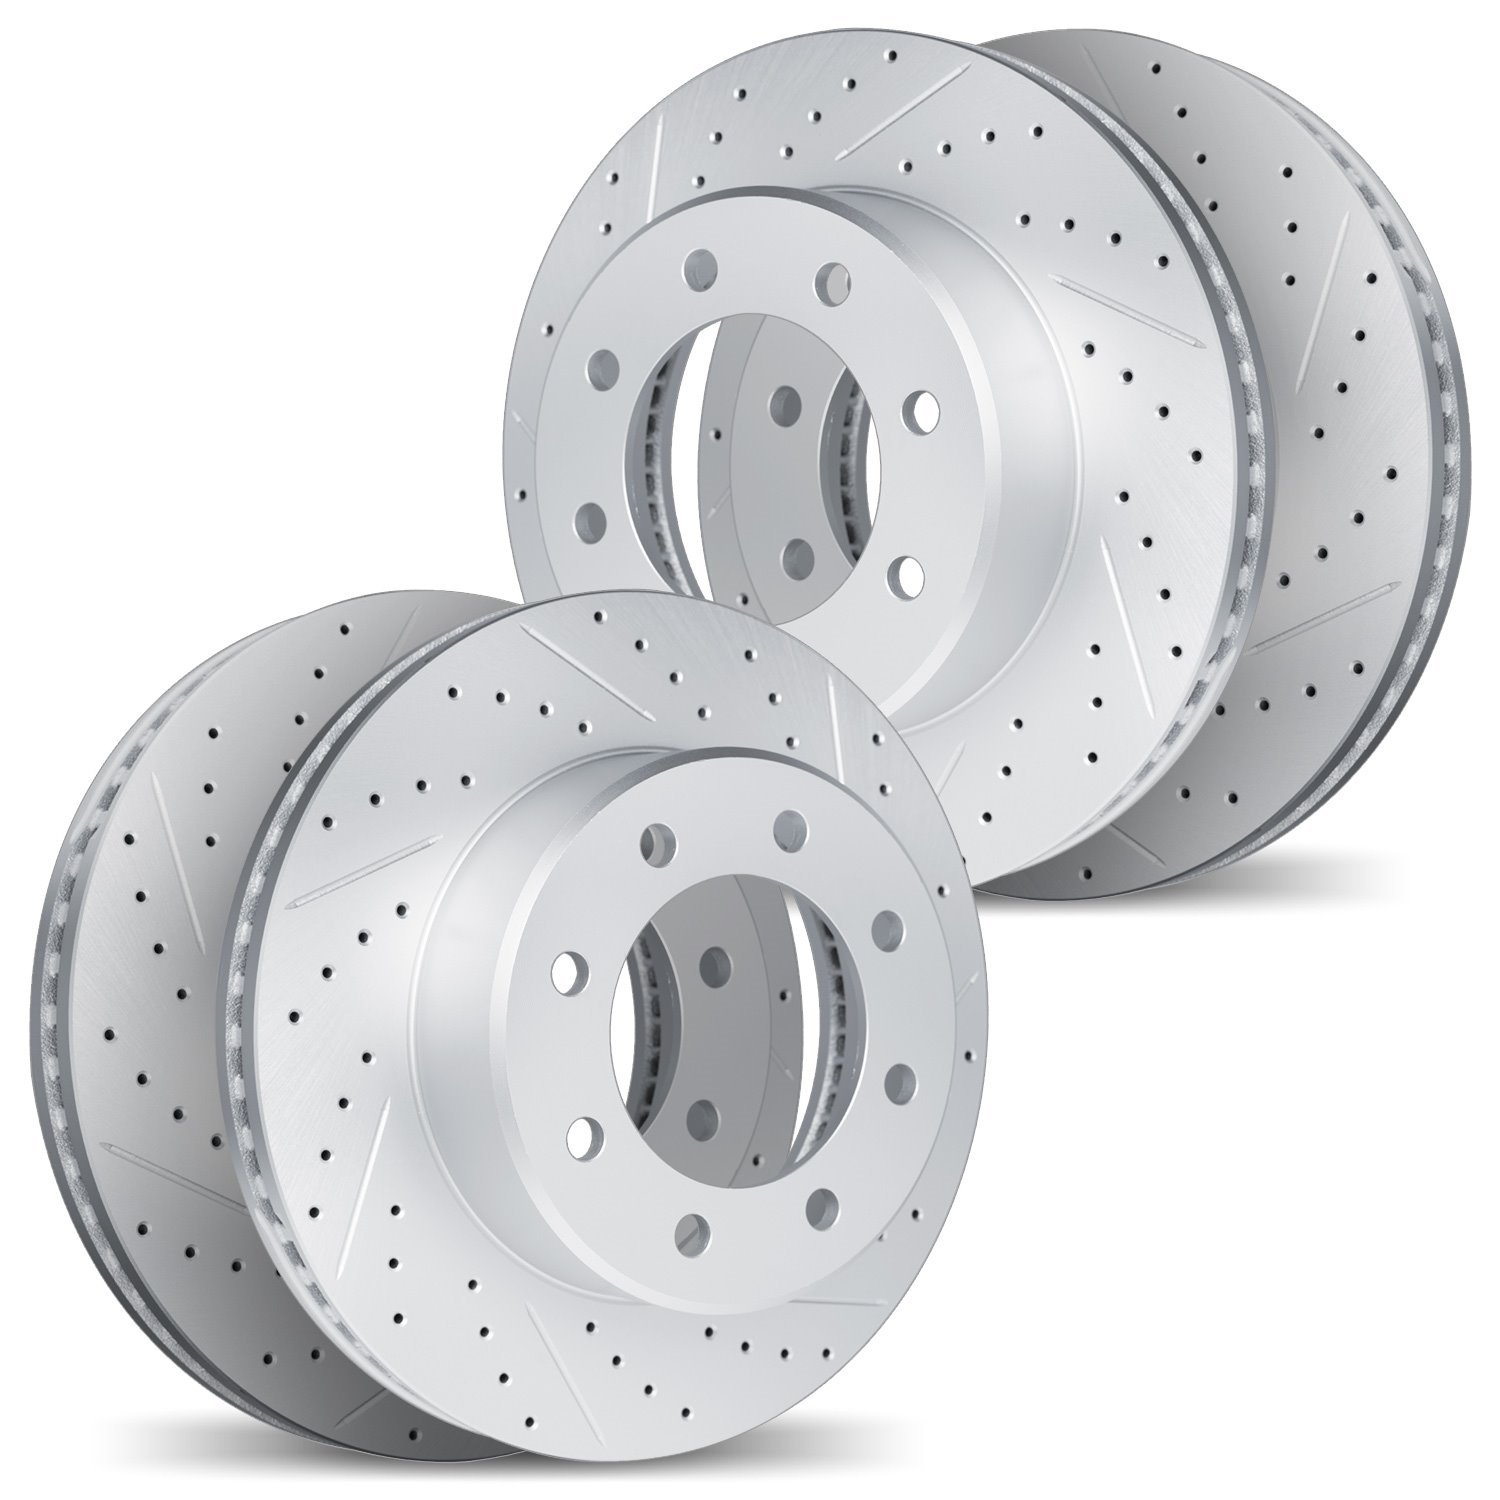 2004-54031 Geoperformance Drilled/Slotted Brake Rotors, 1999-2004 Ford/Lincoln/Mercury/Mazda, Position: Front and Rear